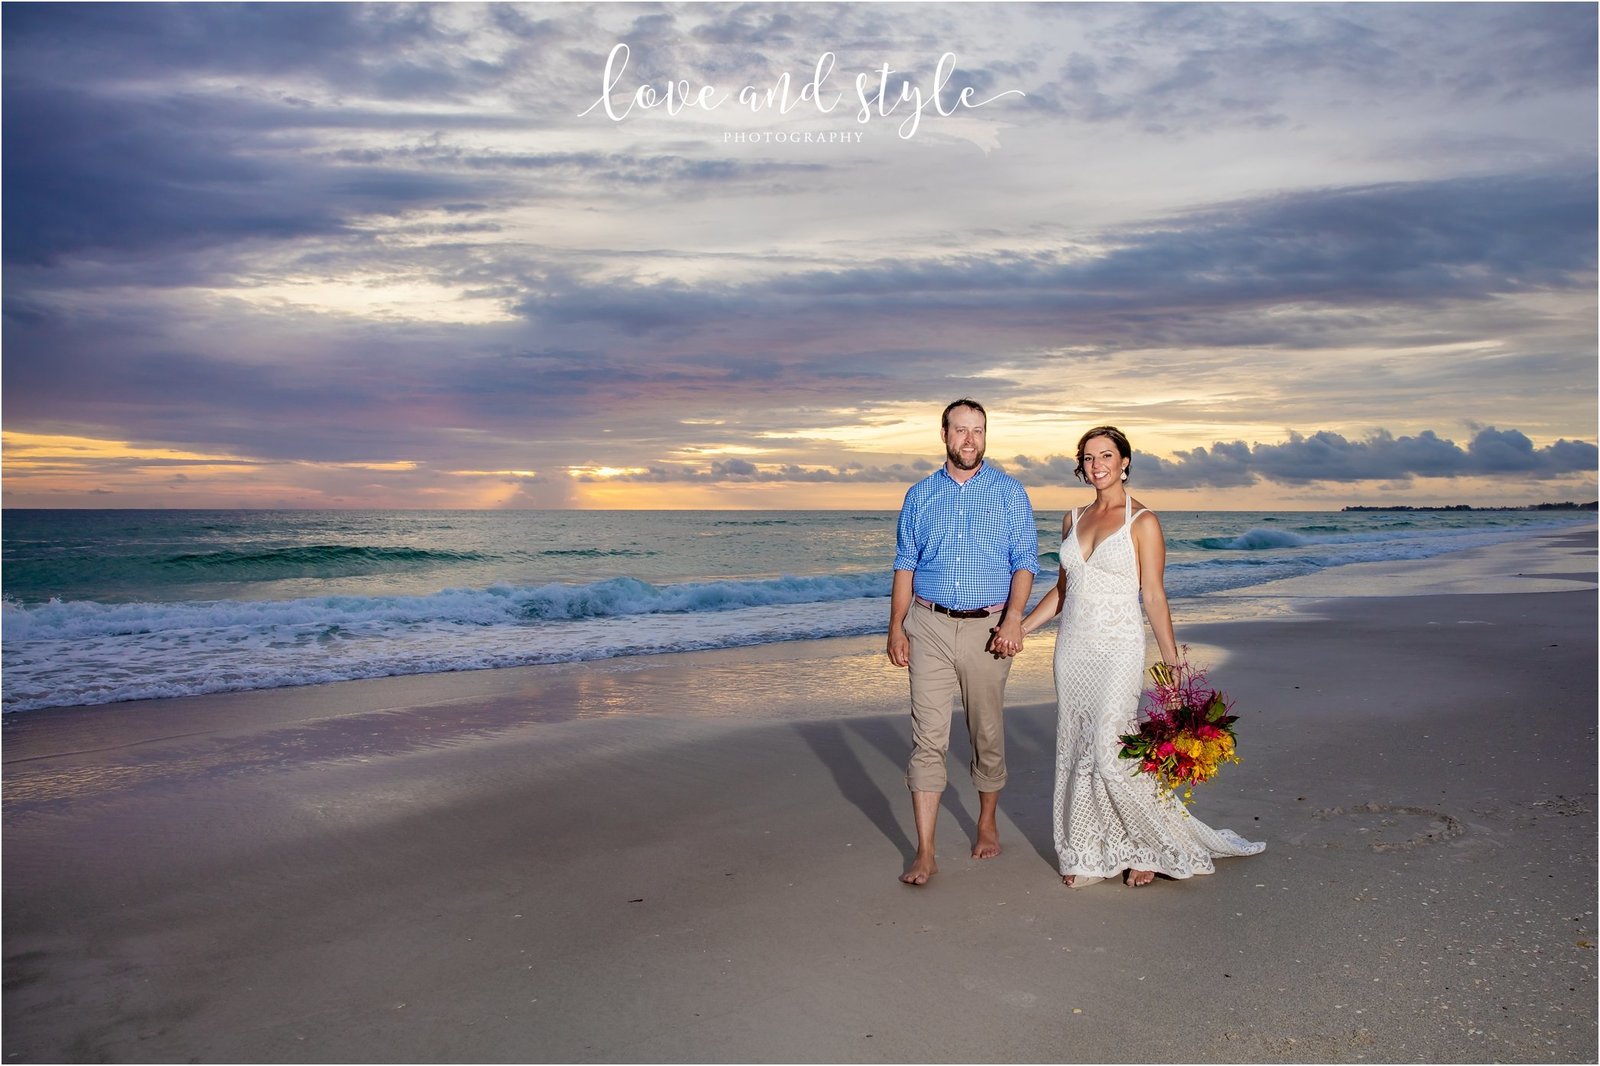 Bride and Groom walking on Bradenton Beach at Sunset in front of The Beach House Restaurant, Anna Maria Island